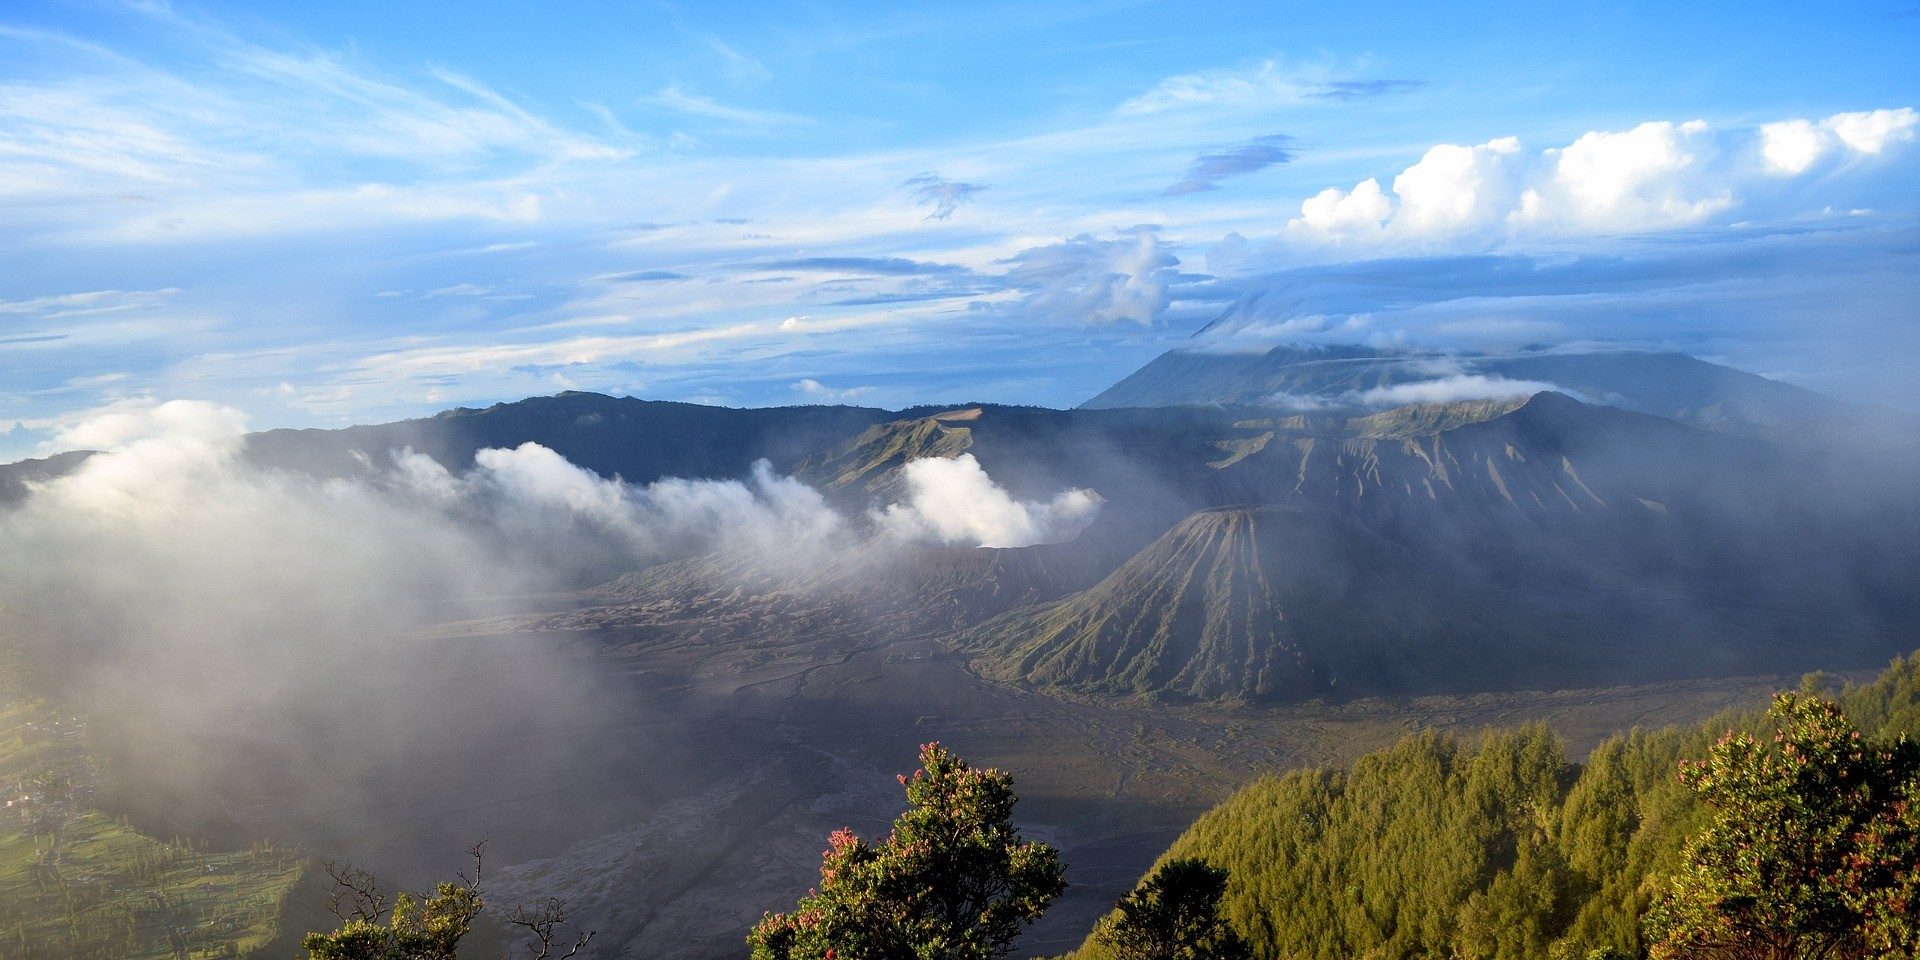 INDONESIAN VOLCANOES YOU CANNOT MISS